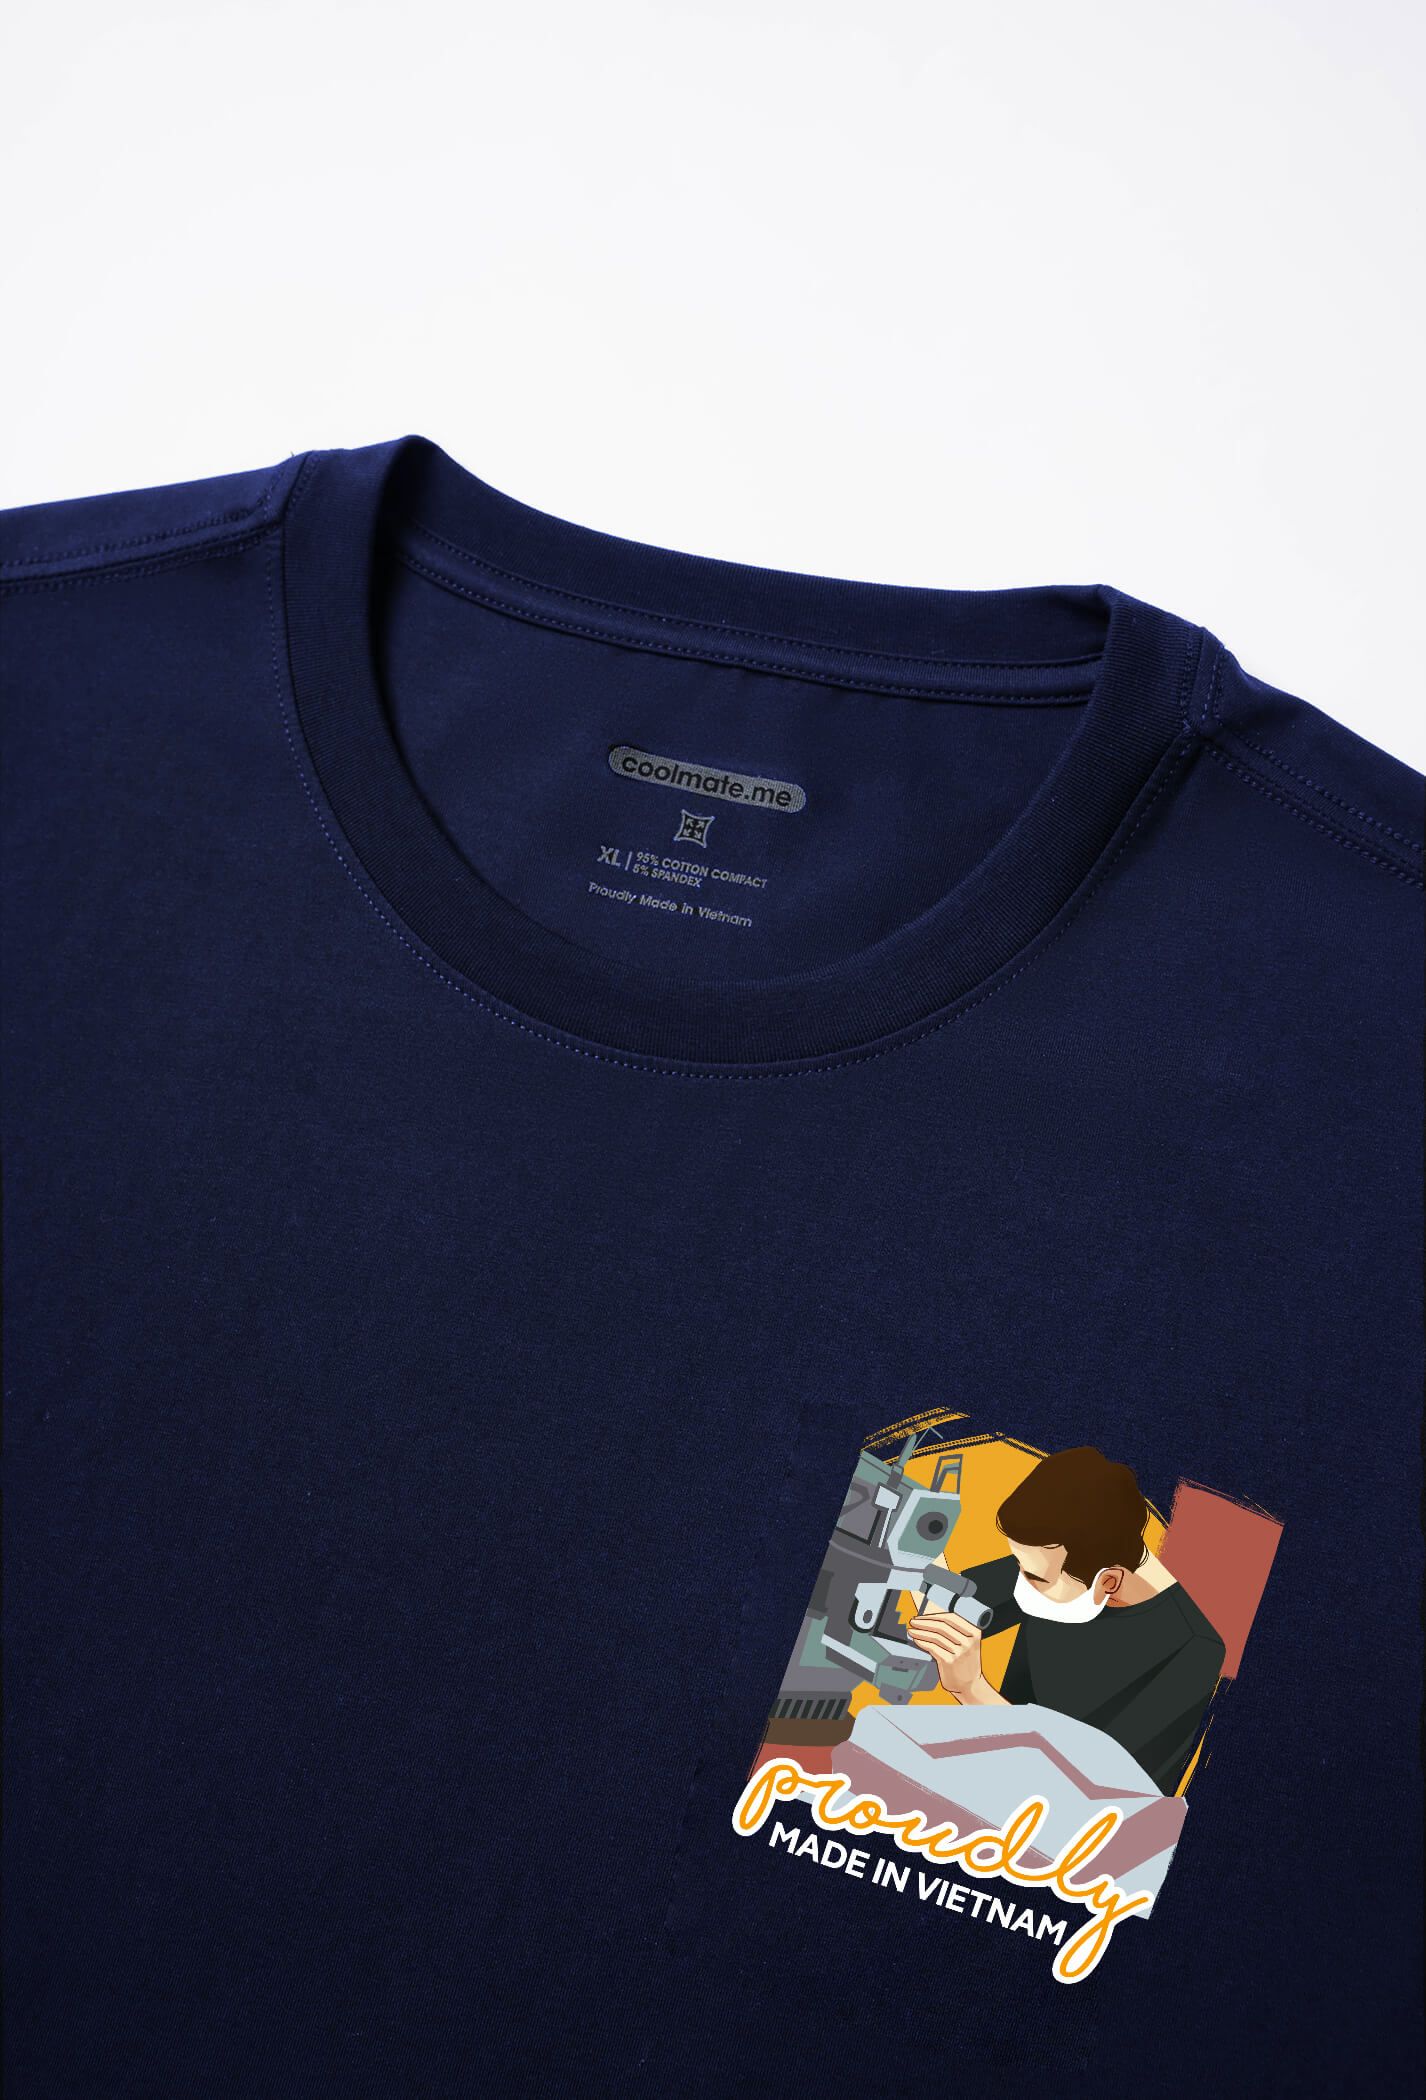  Proudly | Áo thun Cotton Compact "See me: Sawing" in màu xanh-navy 2